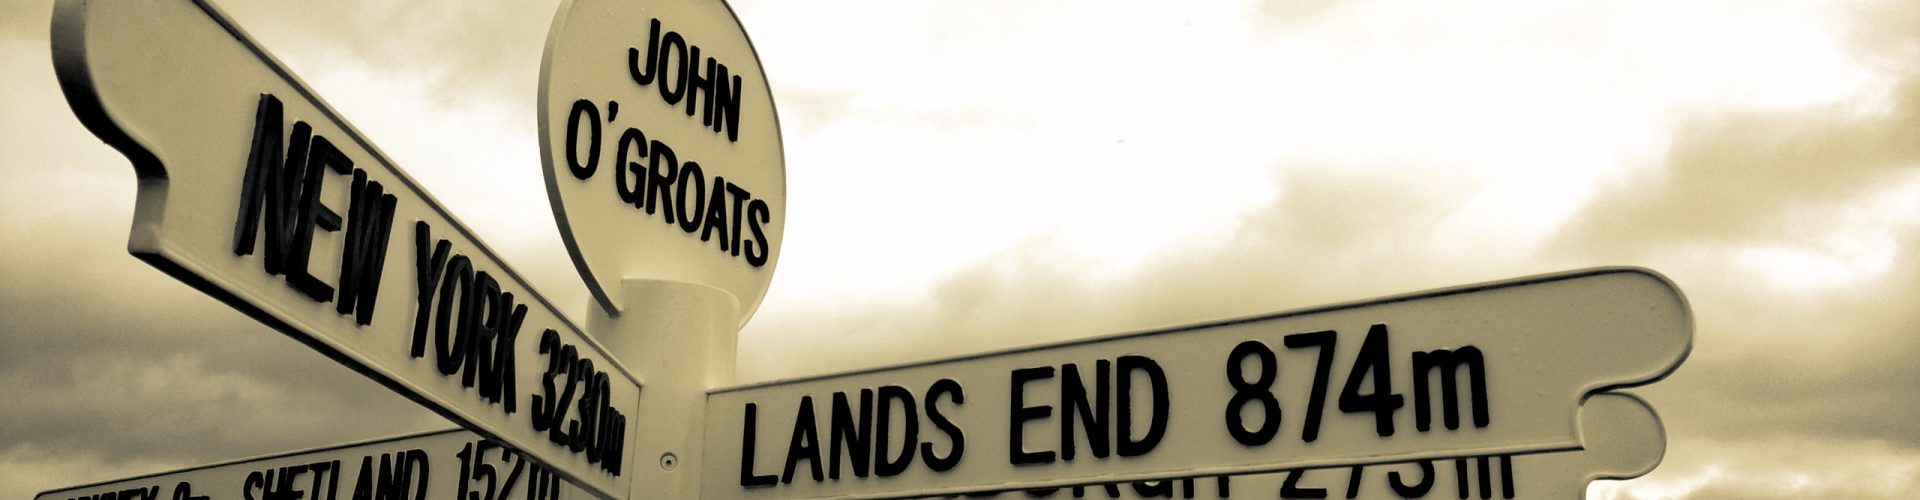 Sign at John O'Groats showing distance to Lands' End